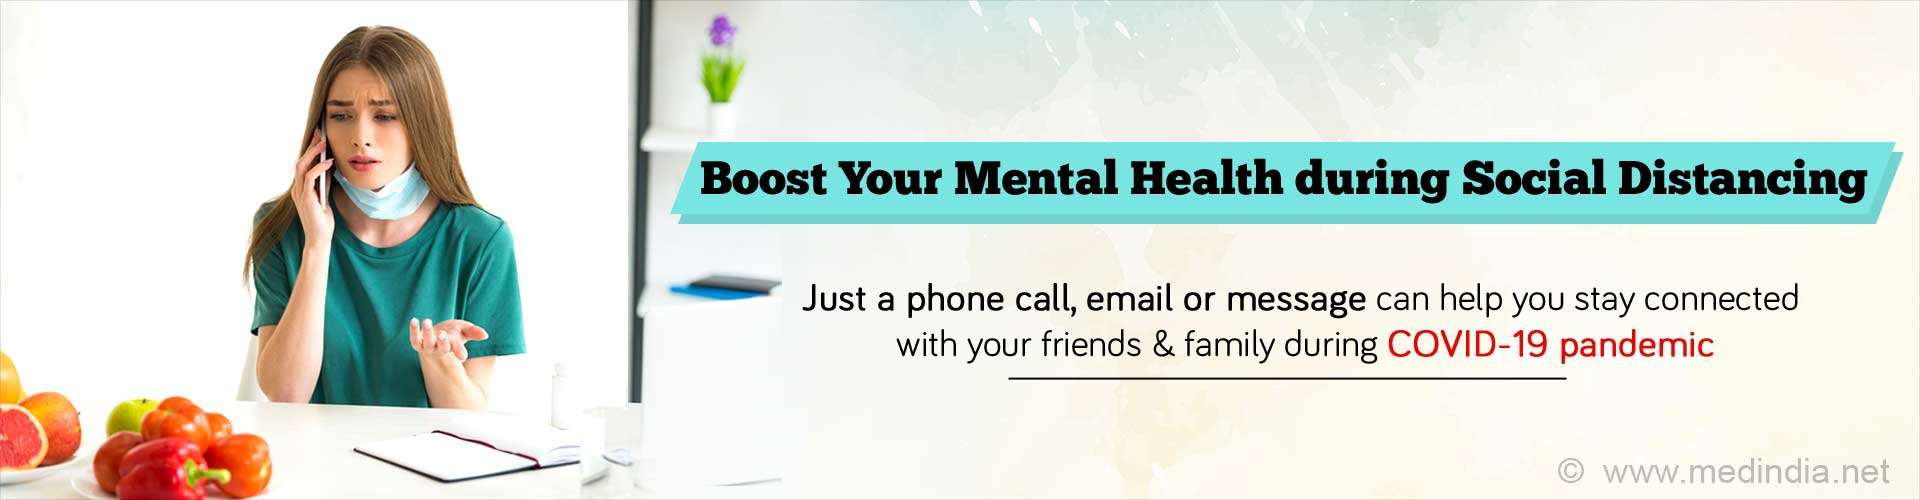 Boost your mental health during social distancing. Just a phone call, email or message can help you stay connected with your friends and family during COVID-19 pandemic.